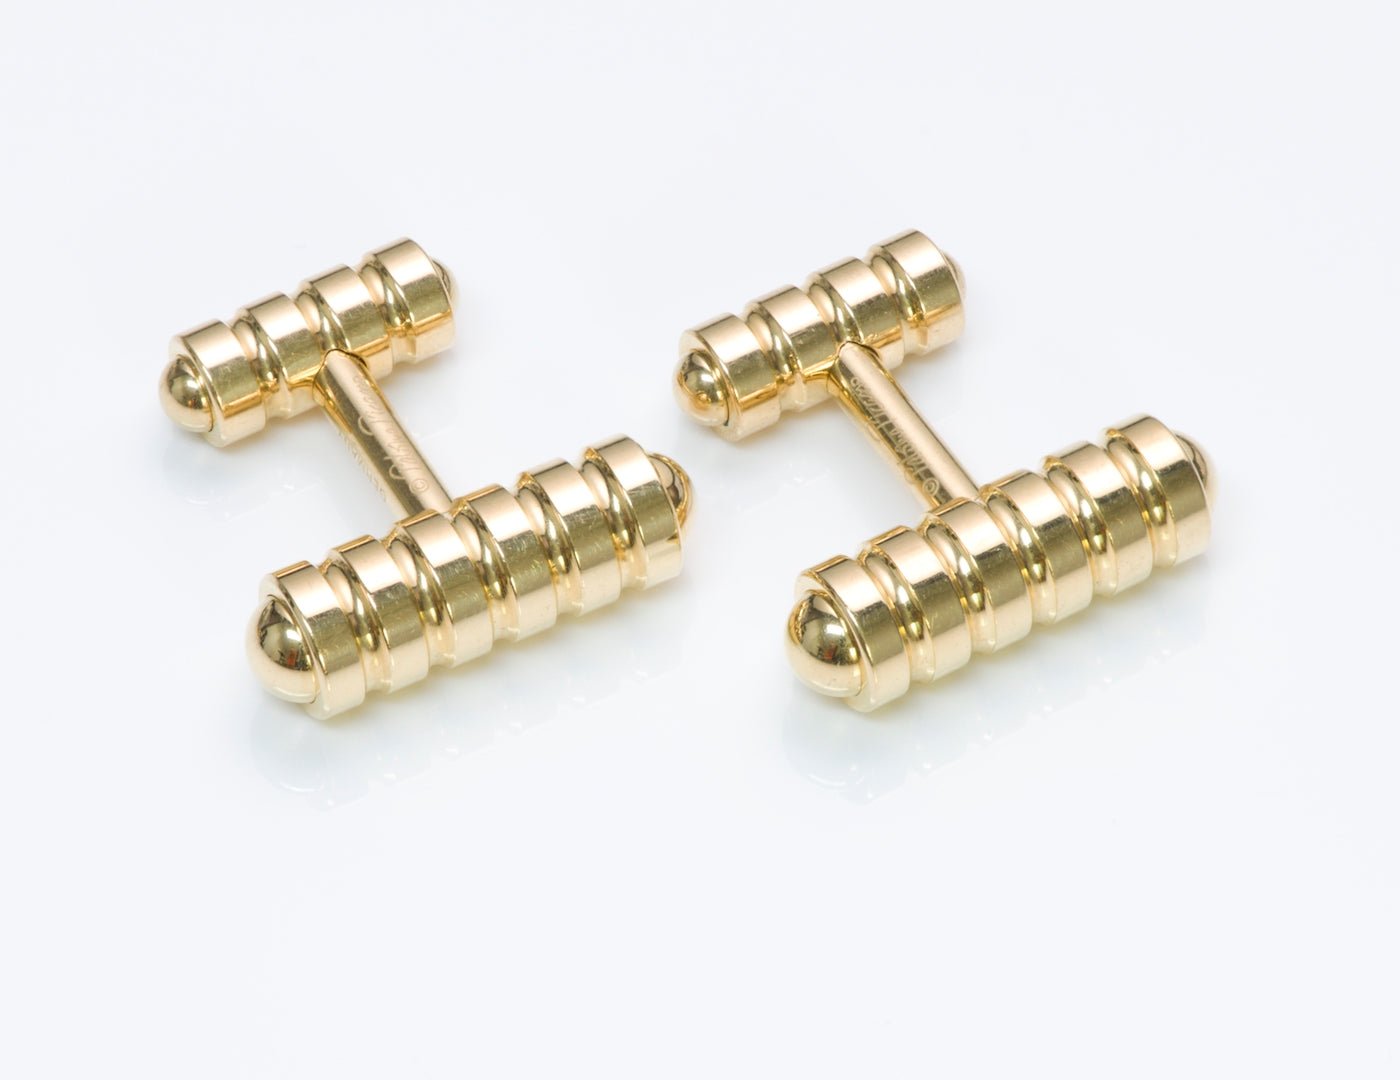 Tiffany & Co. Gold Cufflinks by Paloma Picasso